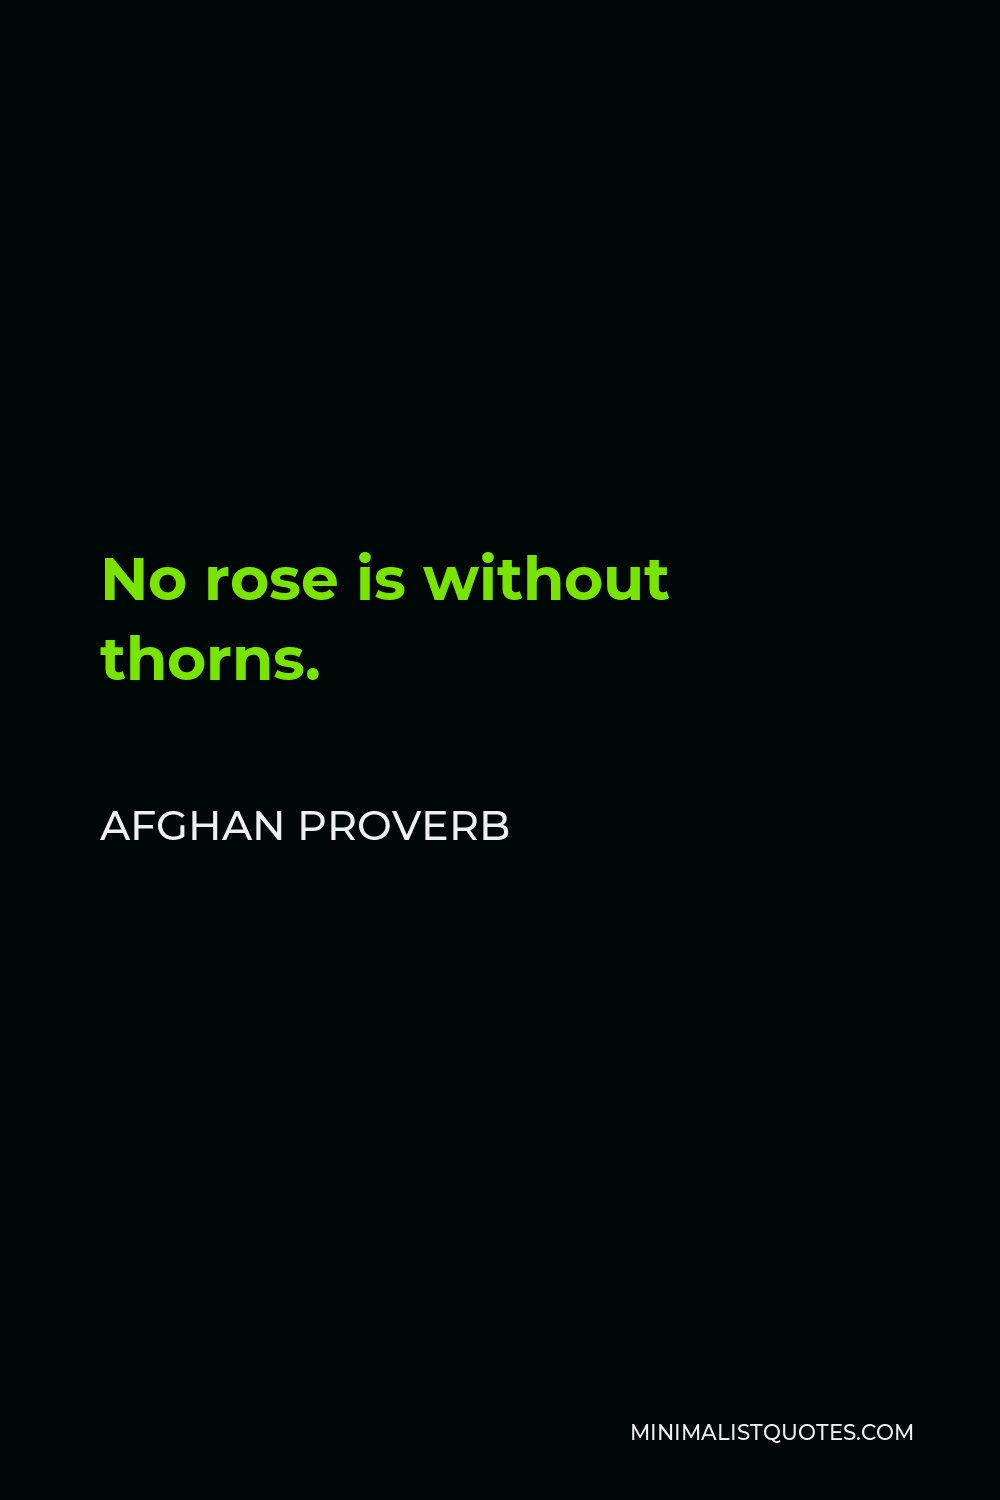 Afghan Proverb Quote - No rose is without thorns.